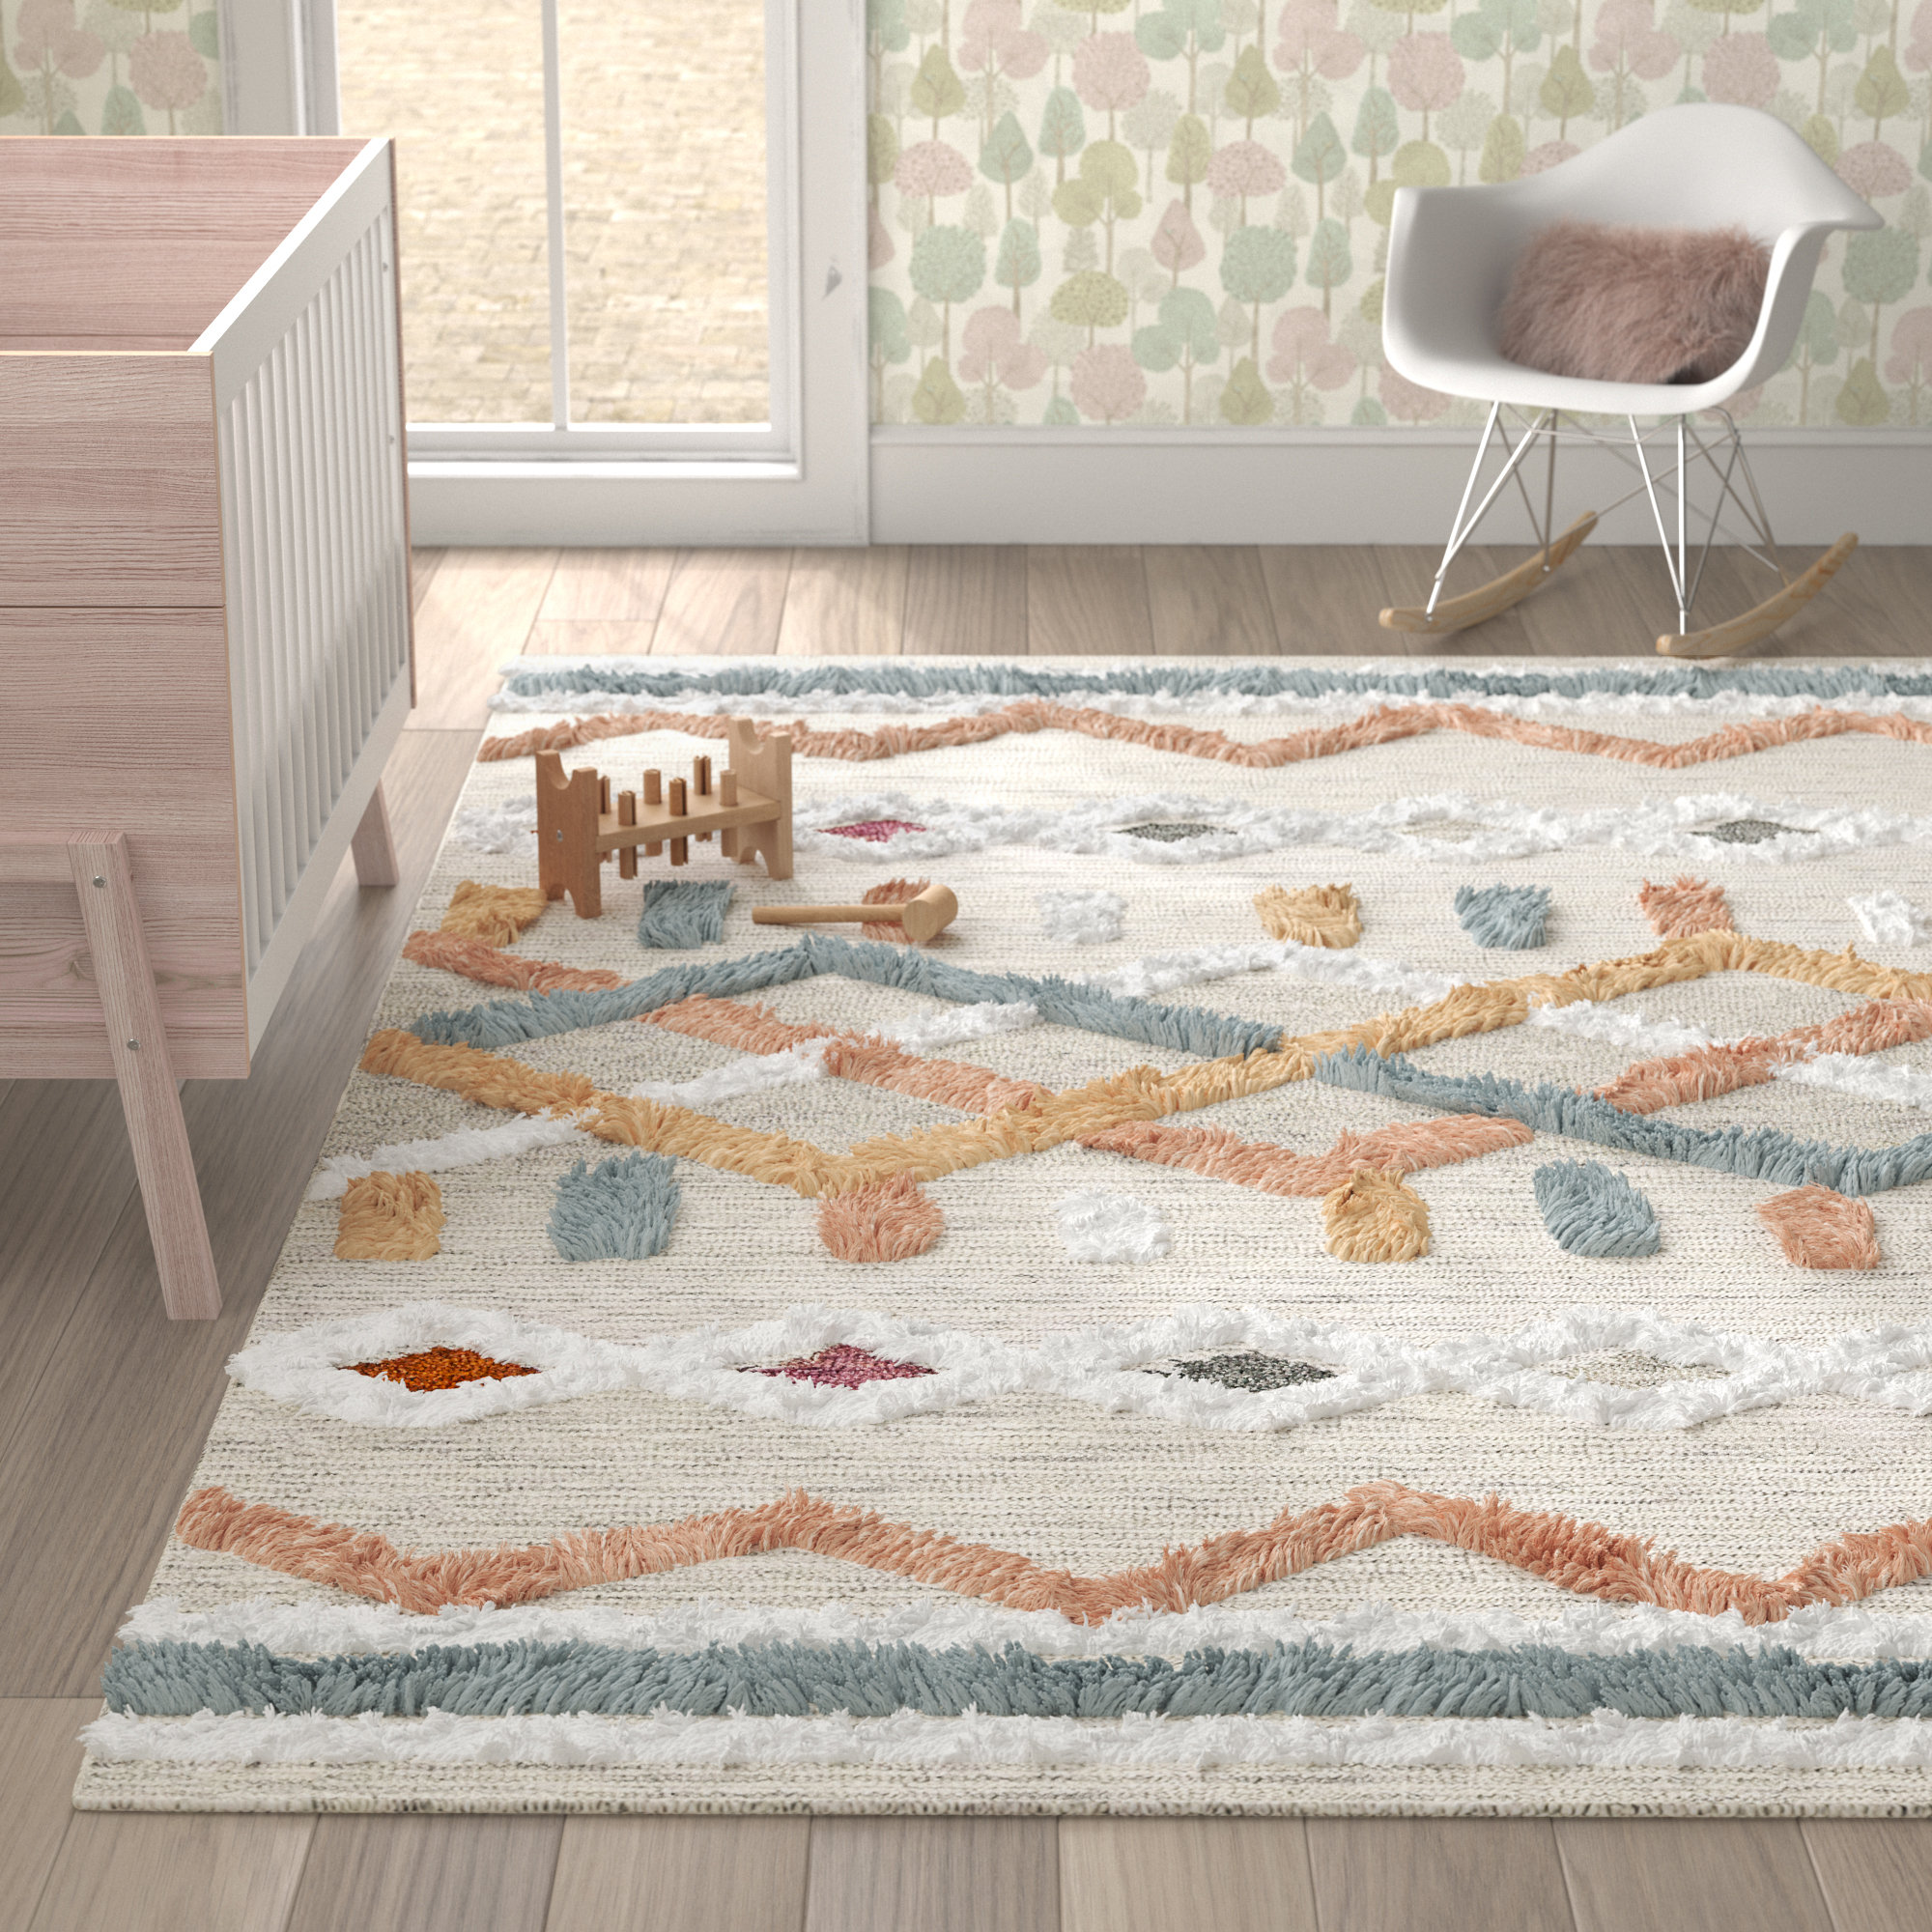 Essential tufting supplies: What you need for your first rug